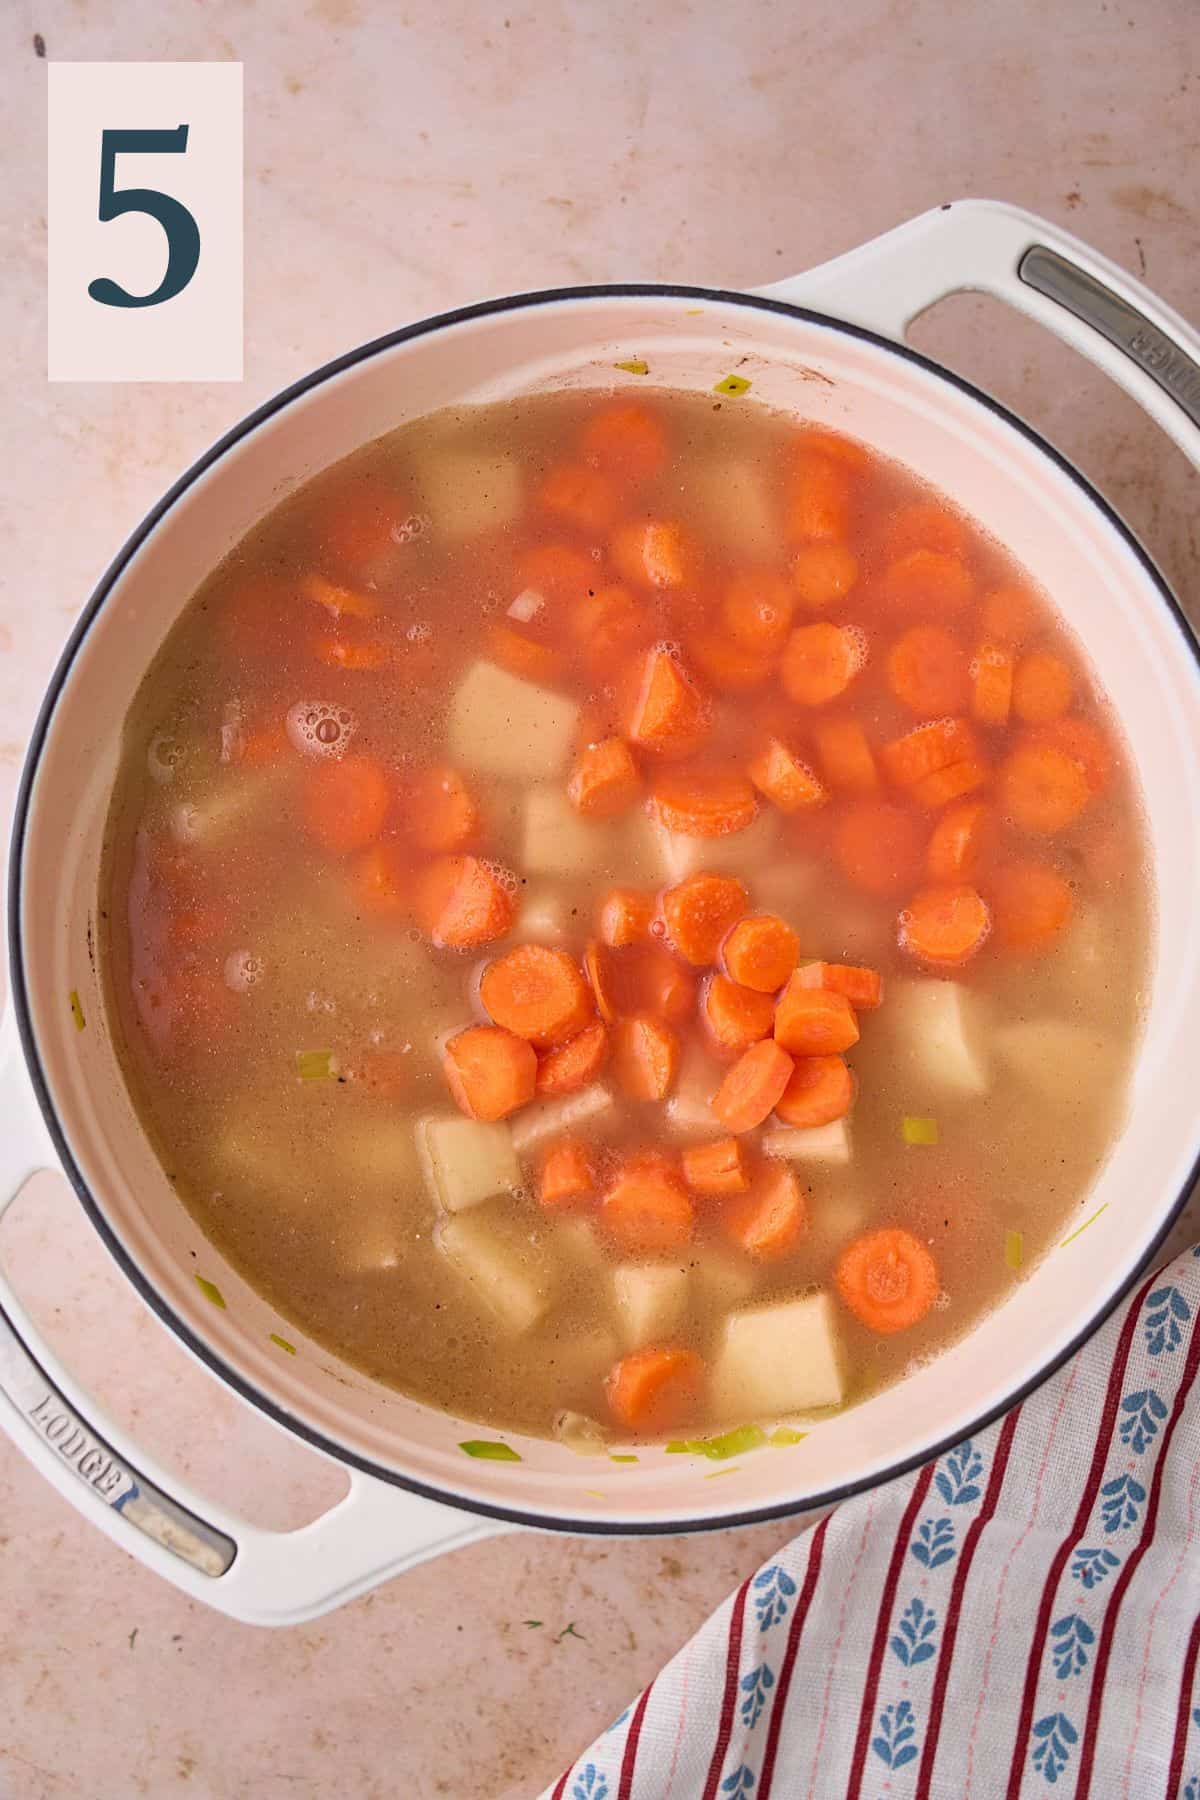 Potatoes, carrots, and fish stock added to a pot.